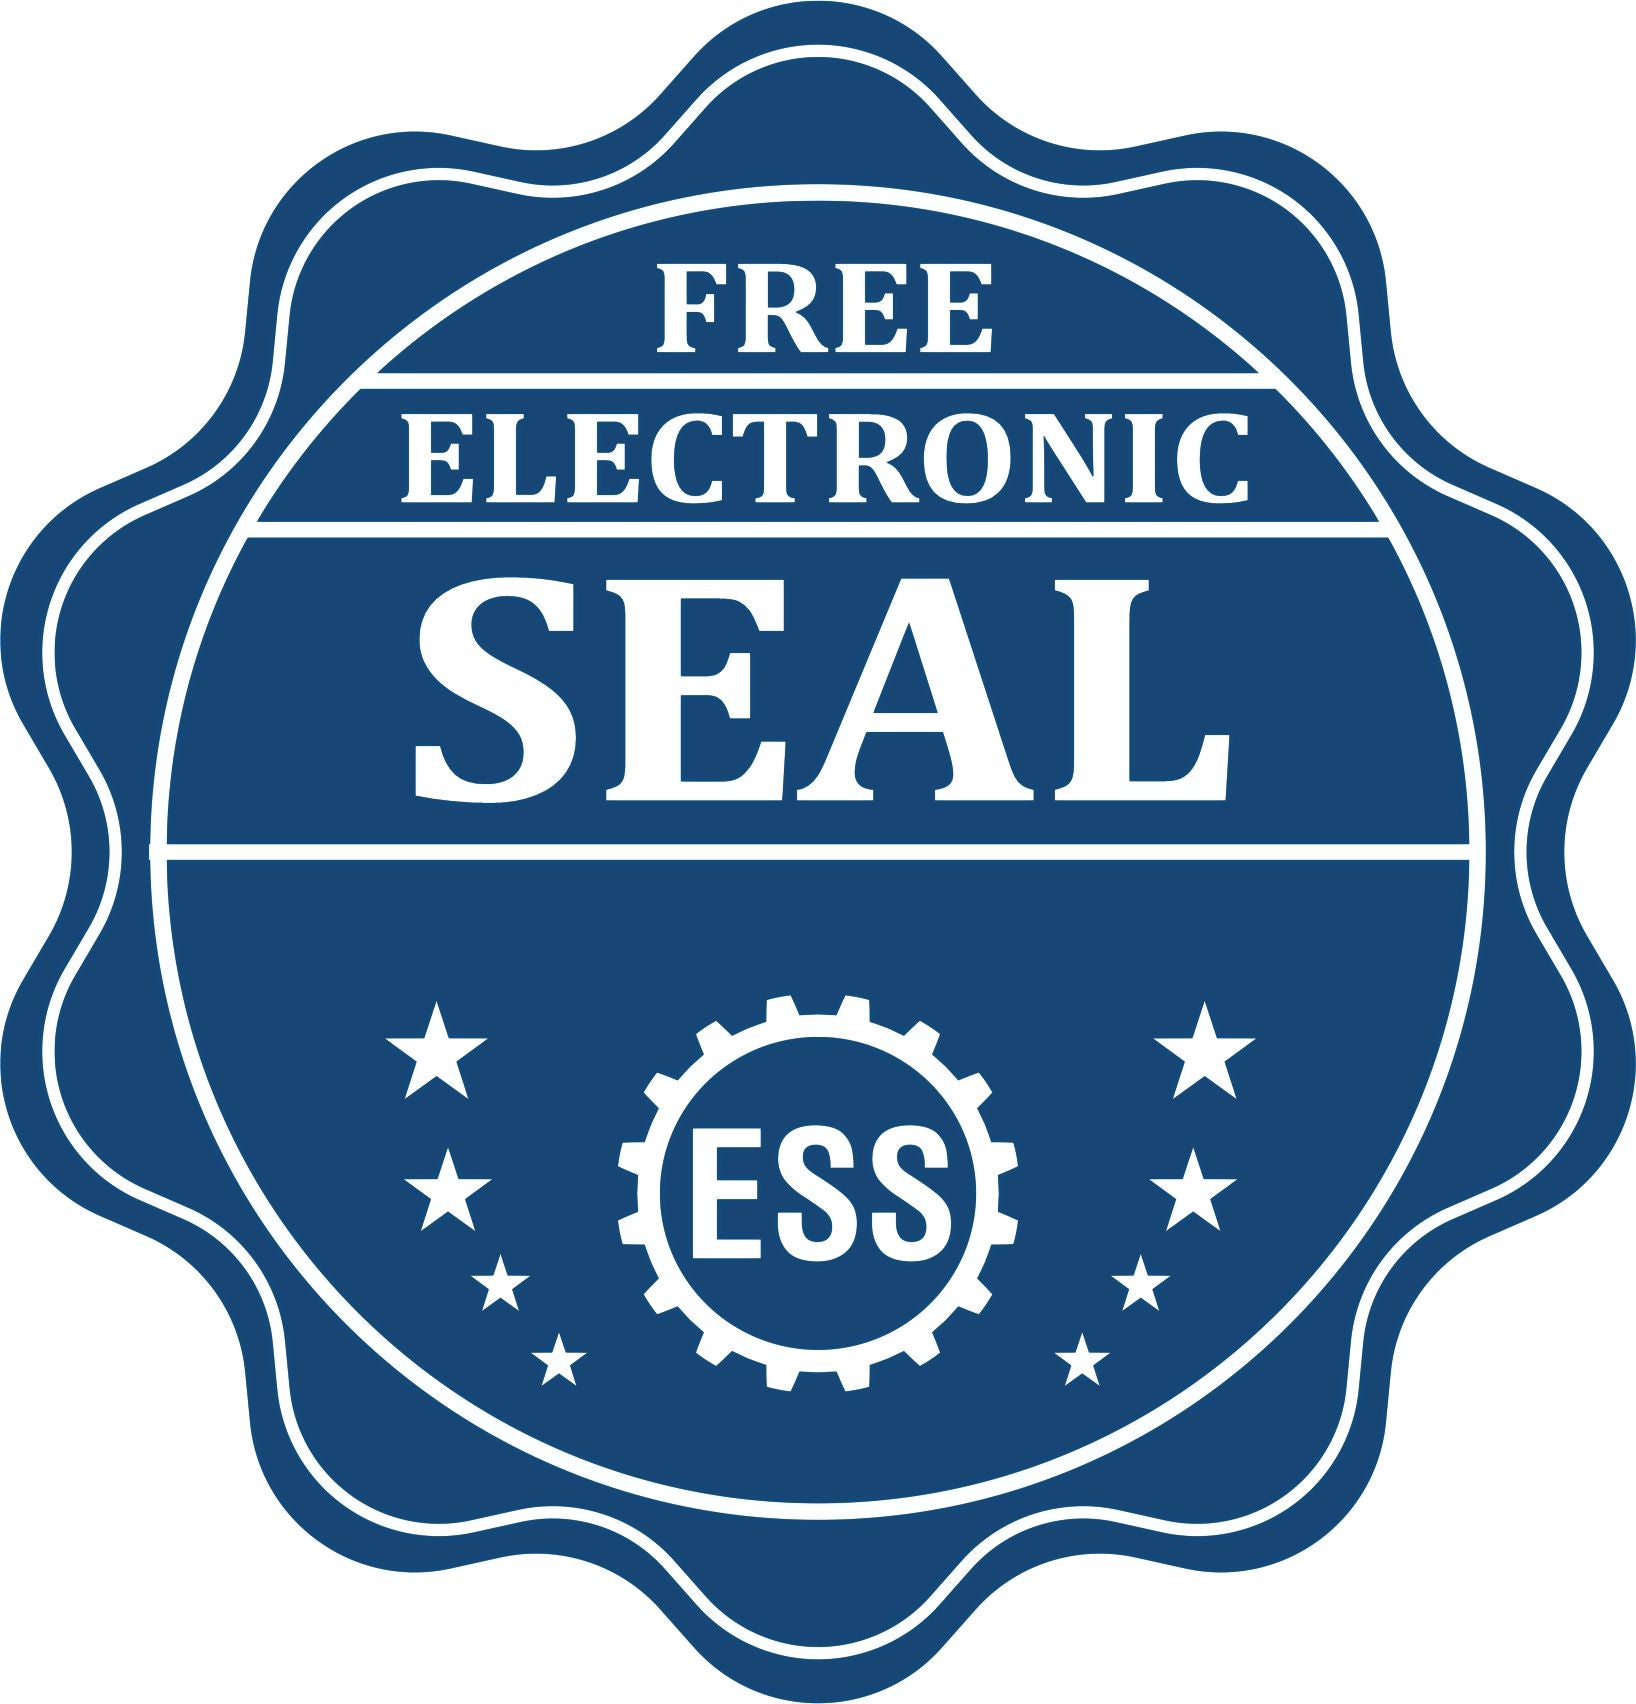 A badge showing a free electronic seal for the State of Washington Soft Land Surveyor Embossing Seal with stars and the ESS gear on the emblem.